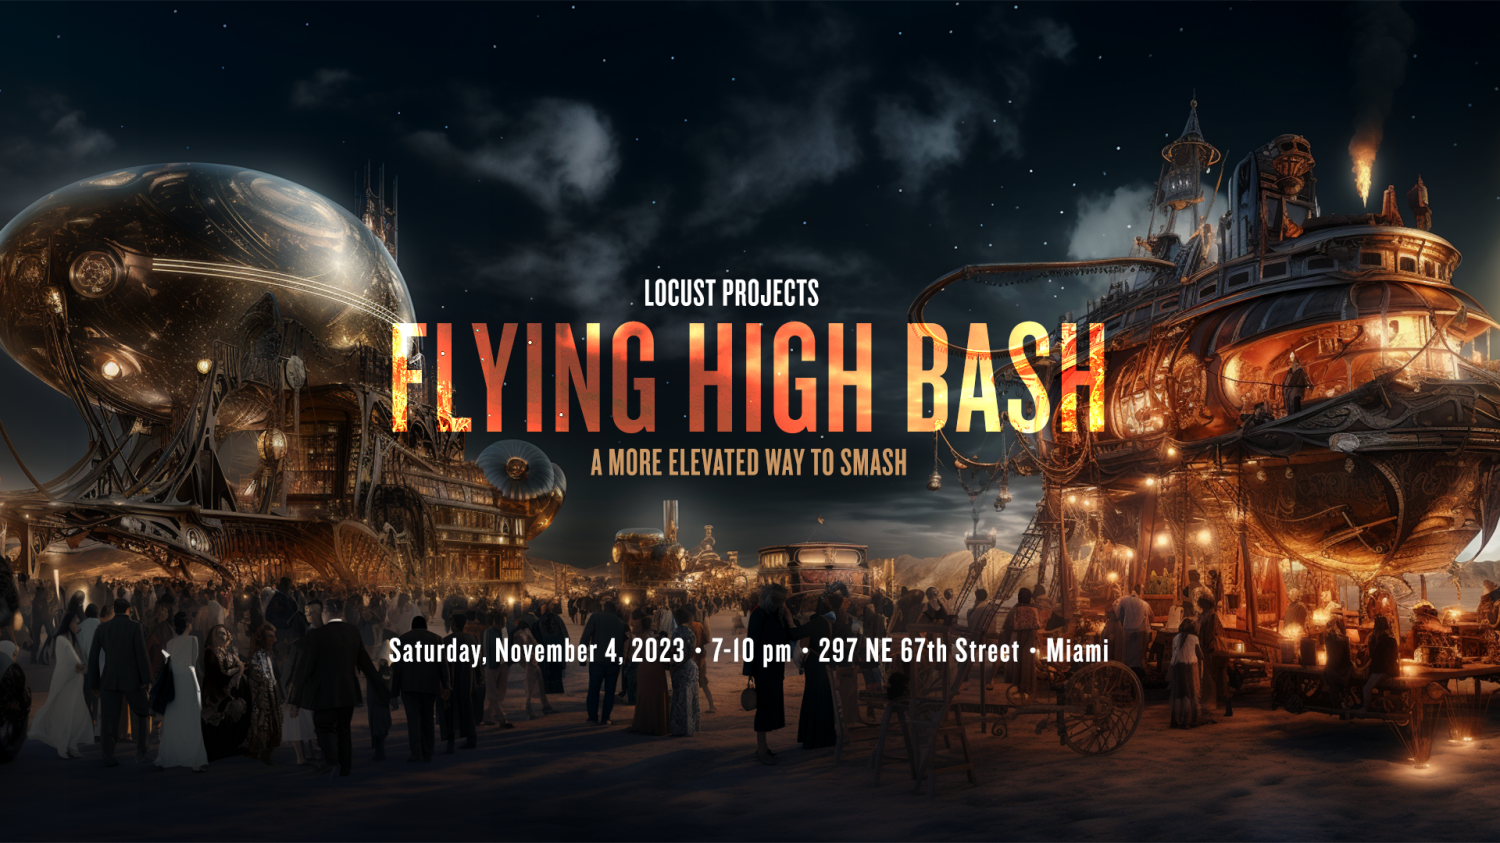 The Flying High Bash